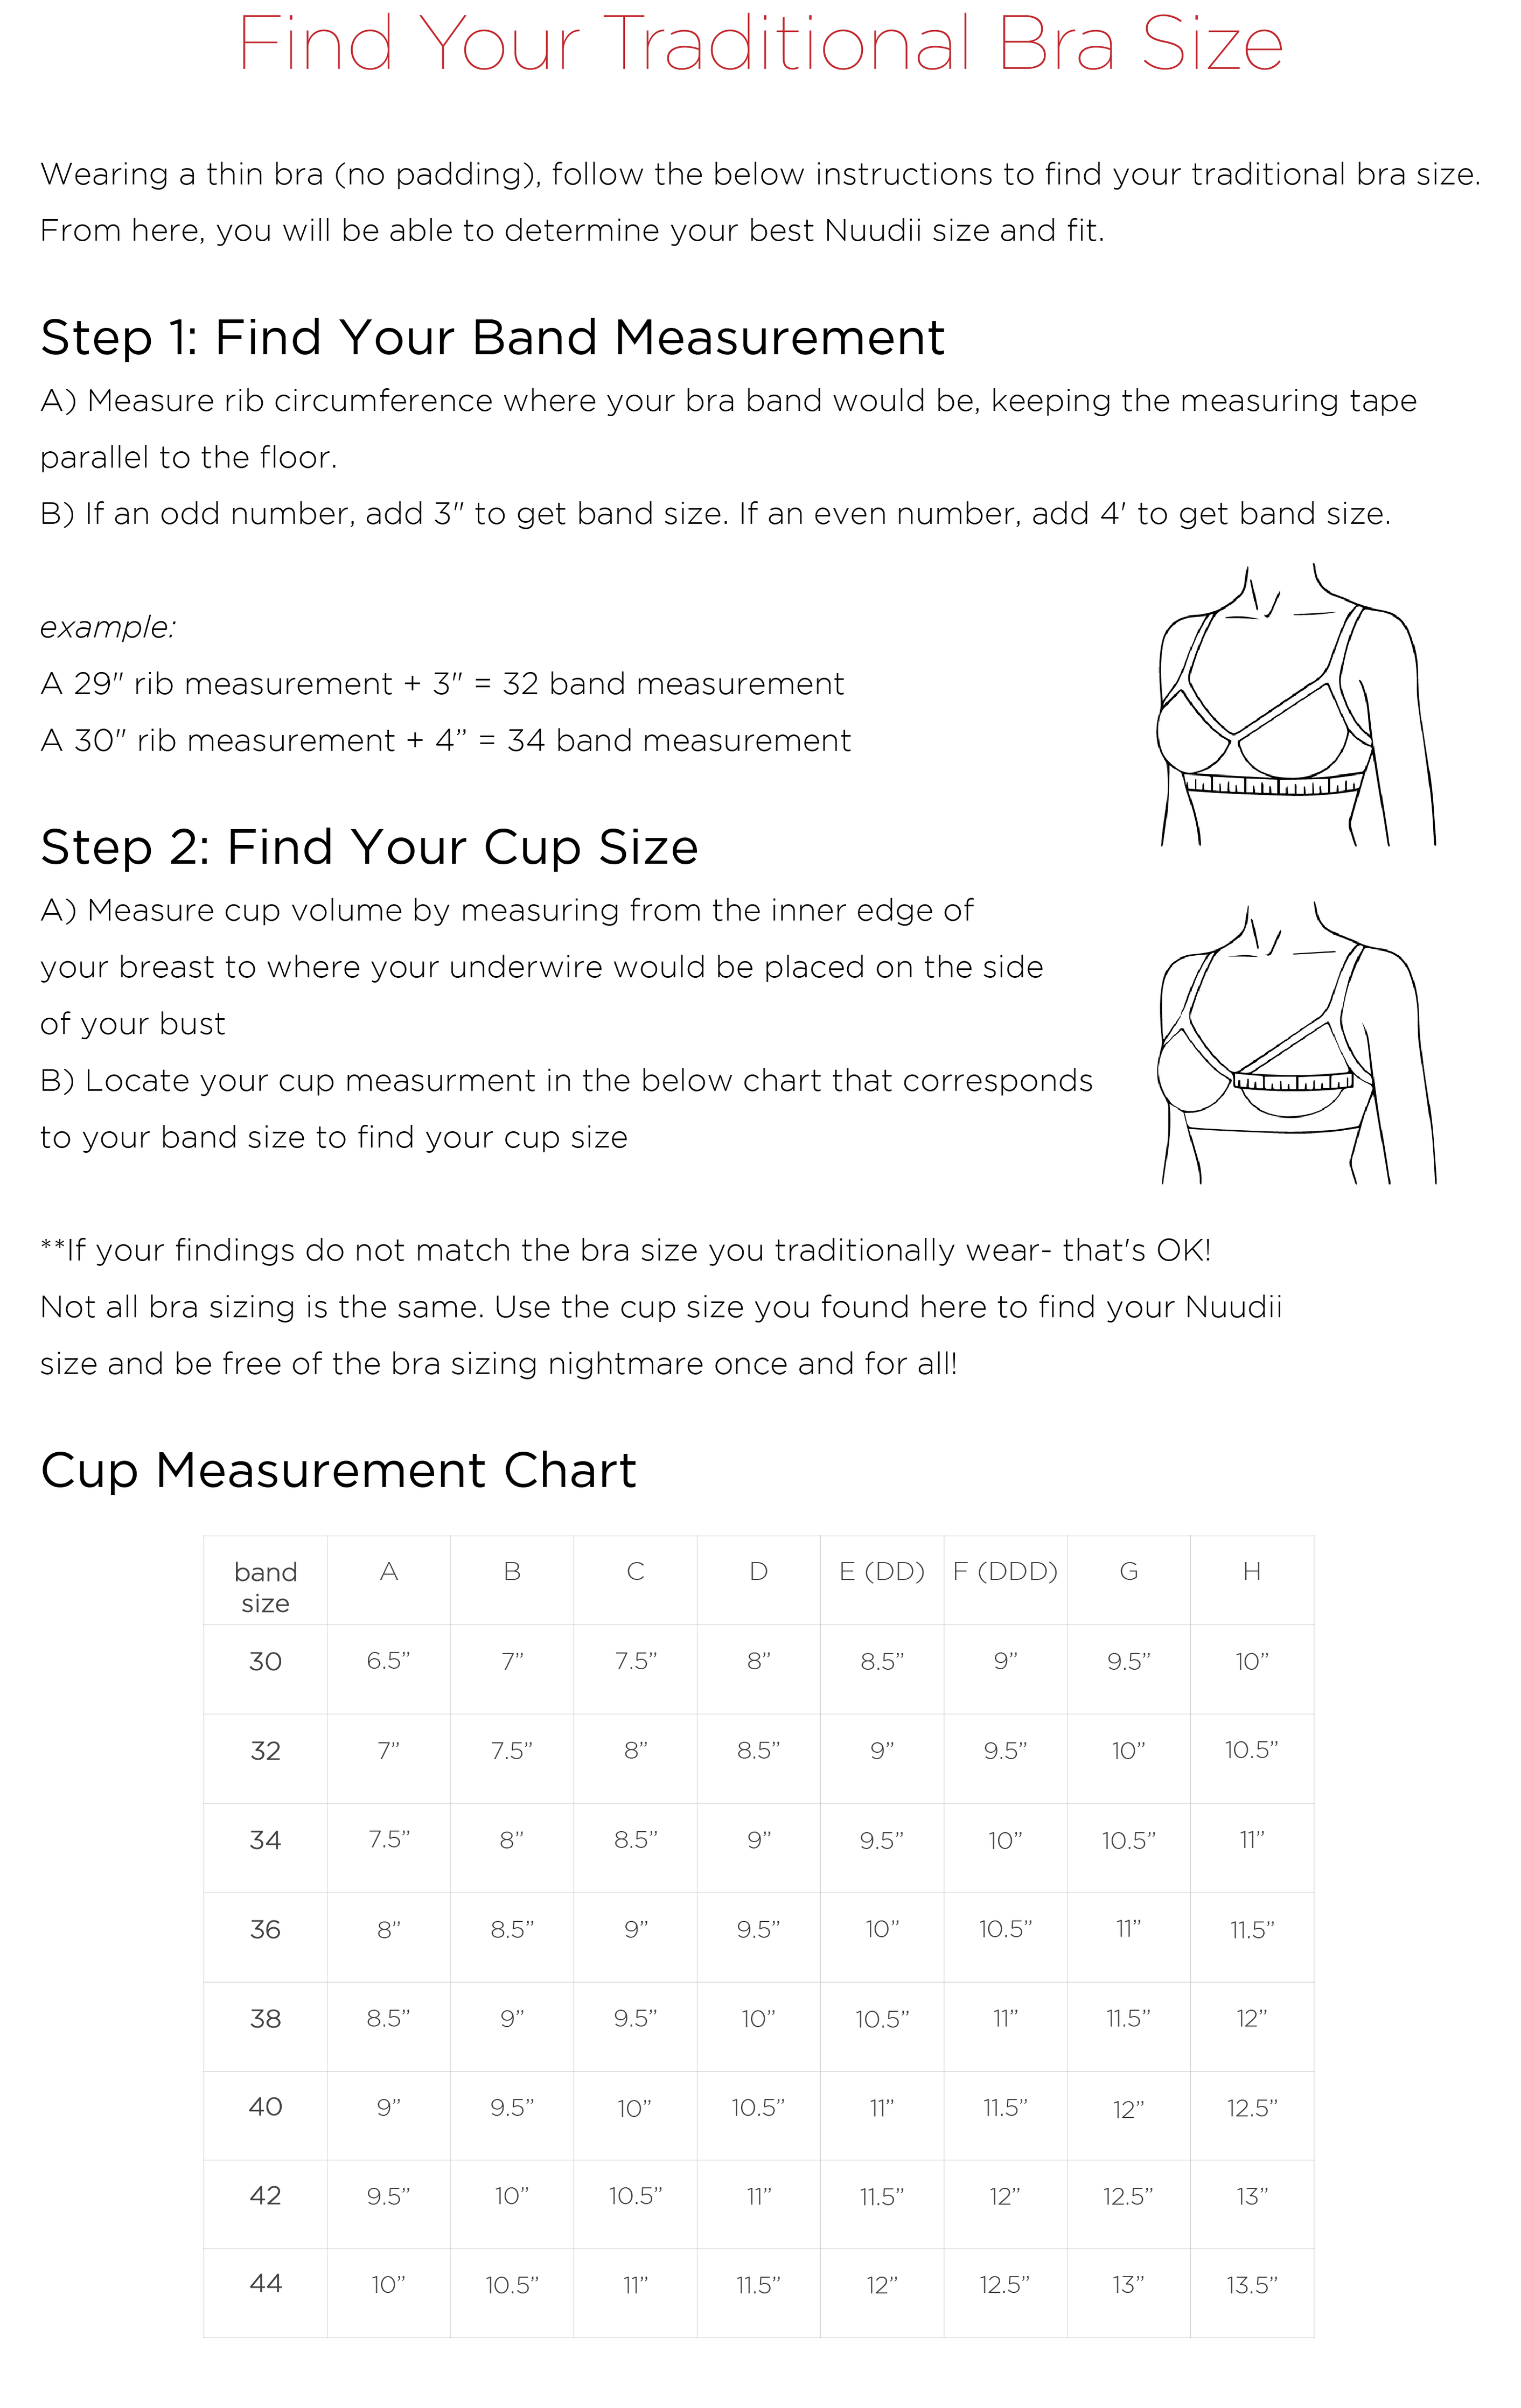 TRADITIONAL BRA SIZE GUIDE - Nuudii System